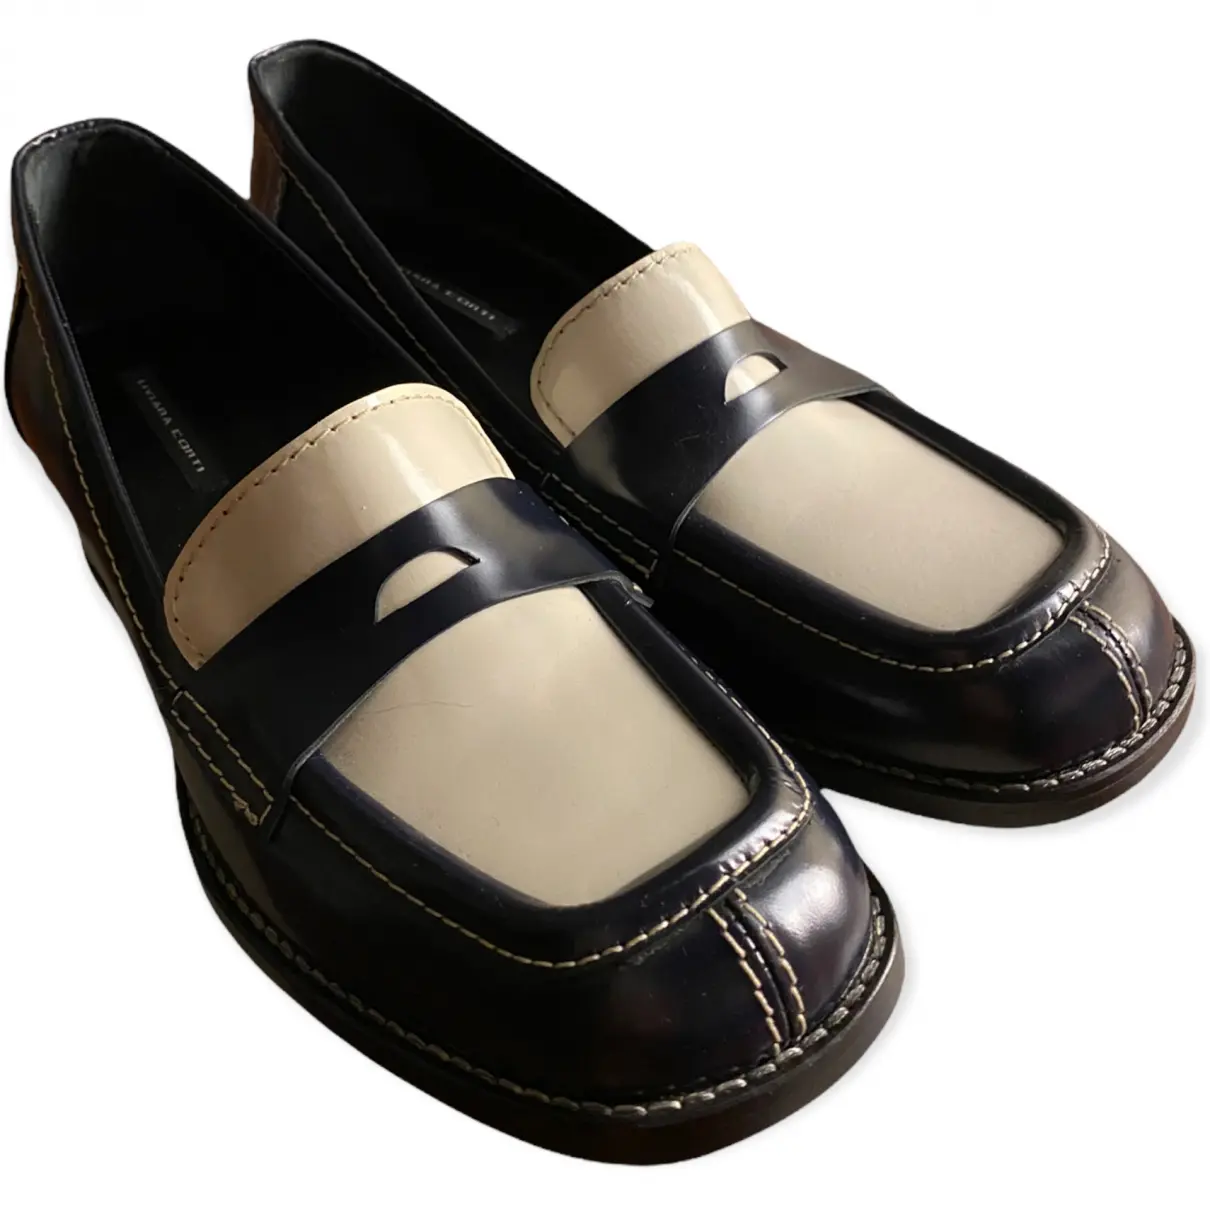 Buy Liviana Conti Leather flats online